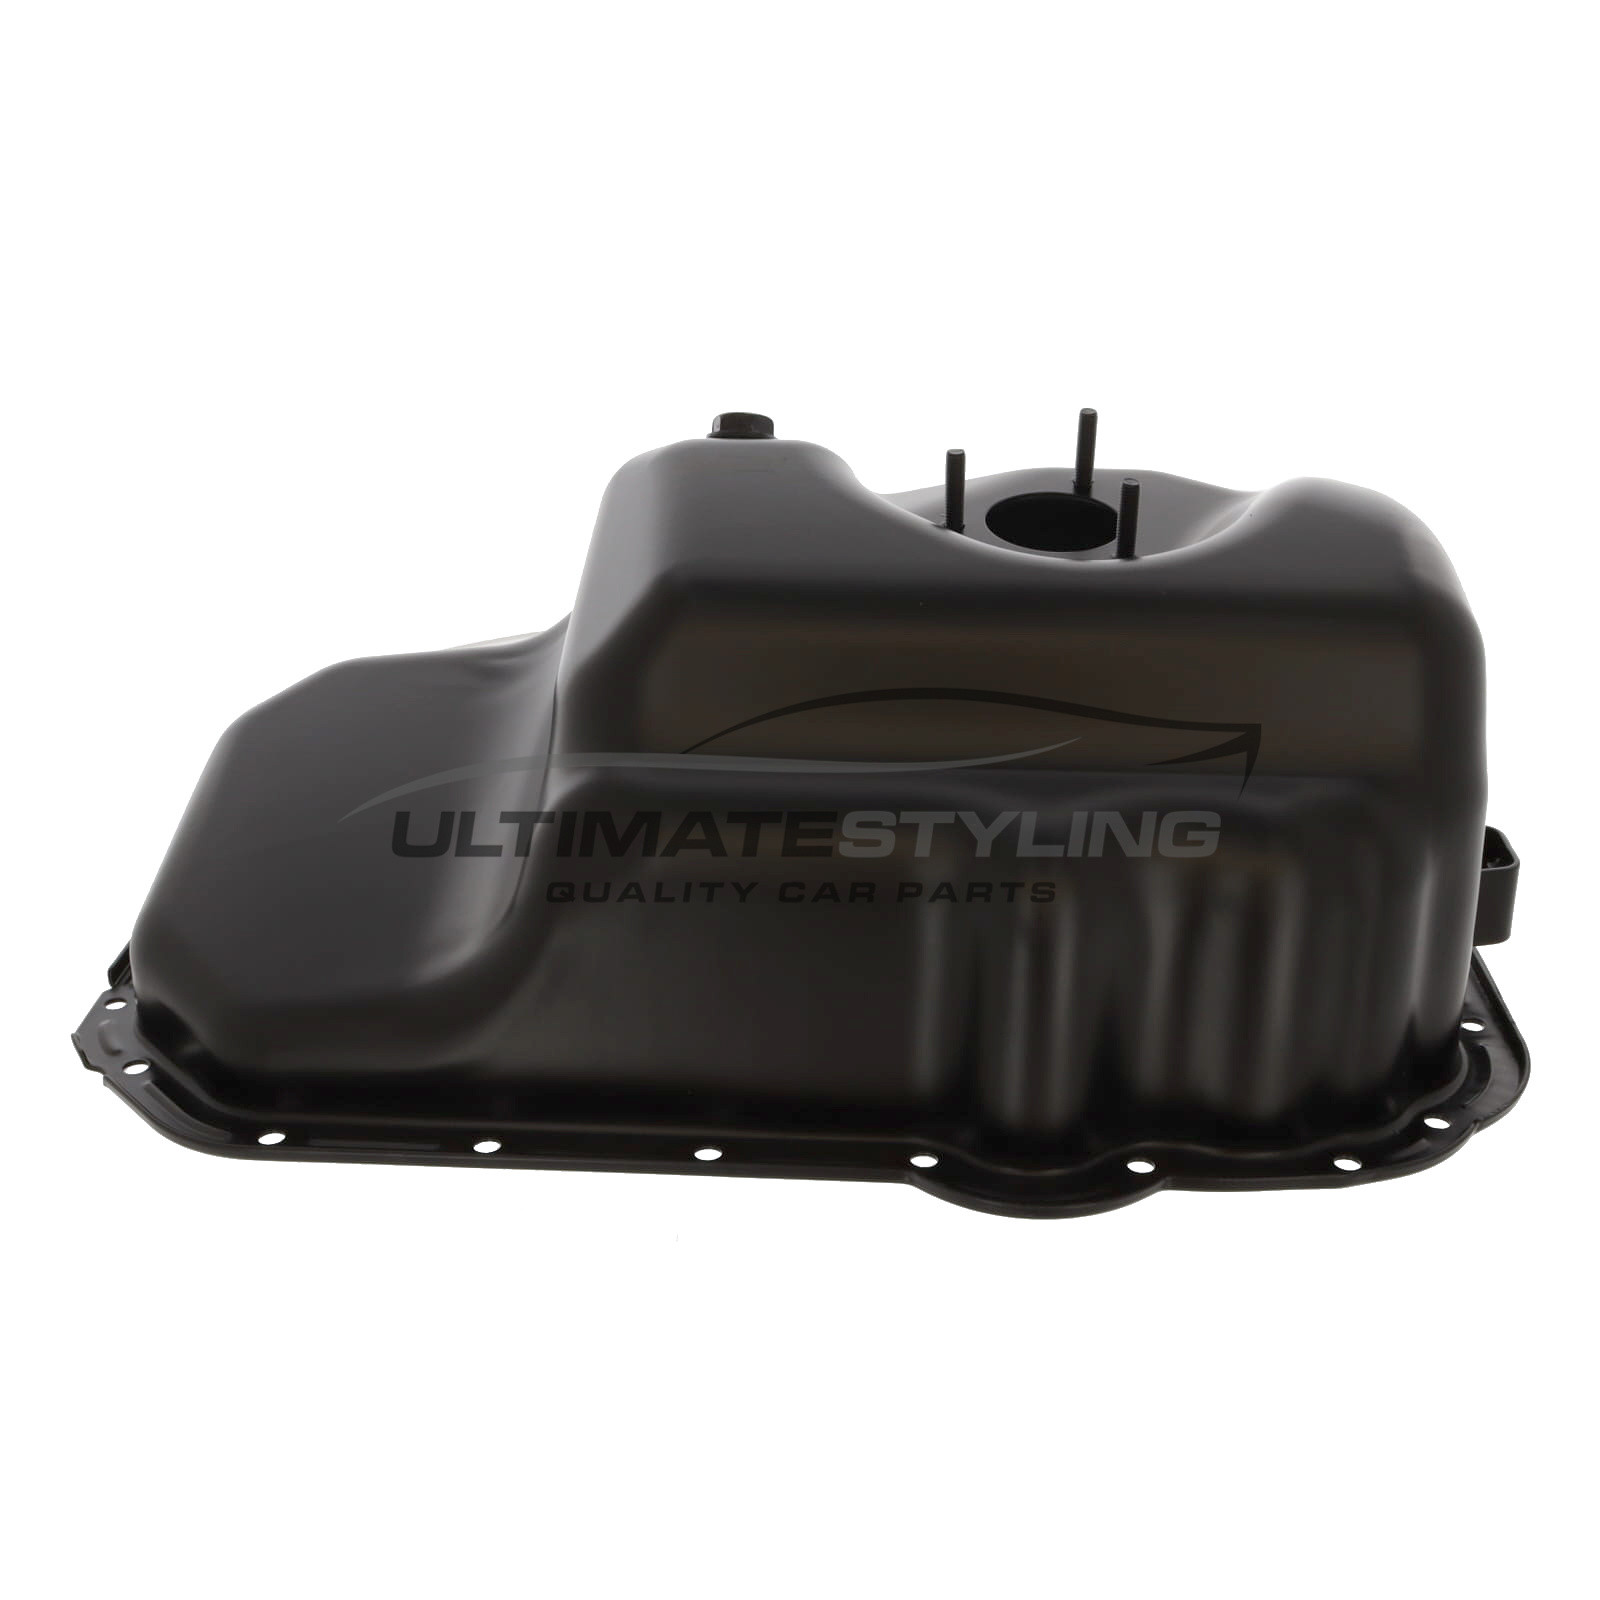 Engine Oil Sump for Seat Ibiza